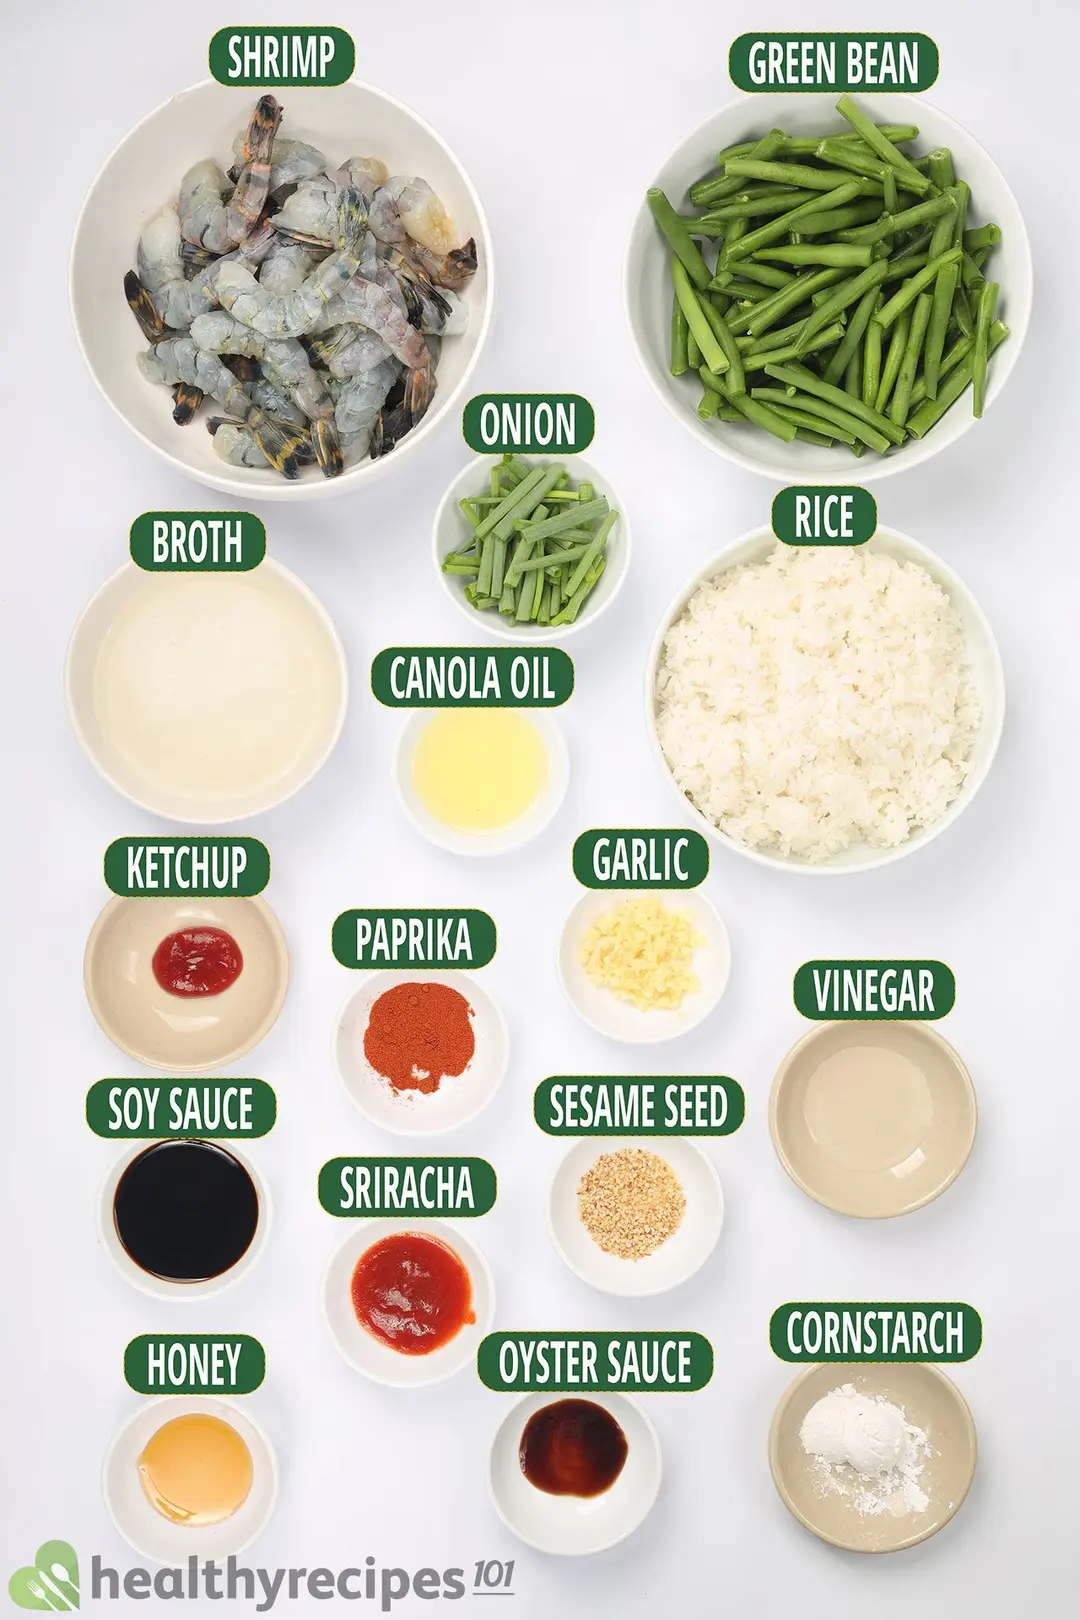 Ingredients for hunan shrimp: peeled shrimp, green beans, chicken broth, onion, cooked rice, and other seasonings, all placed in separate bowls of all sizes